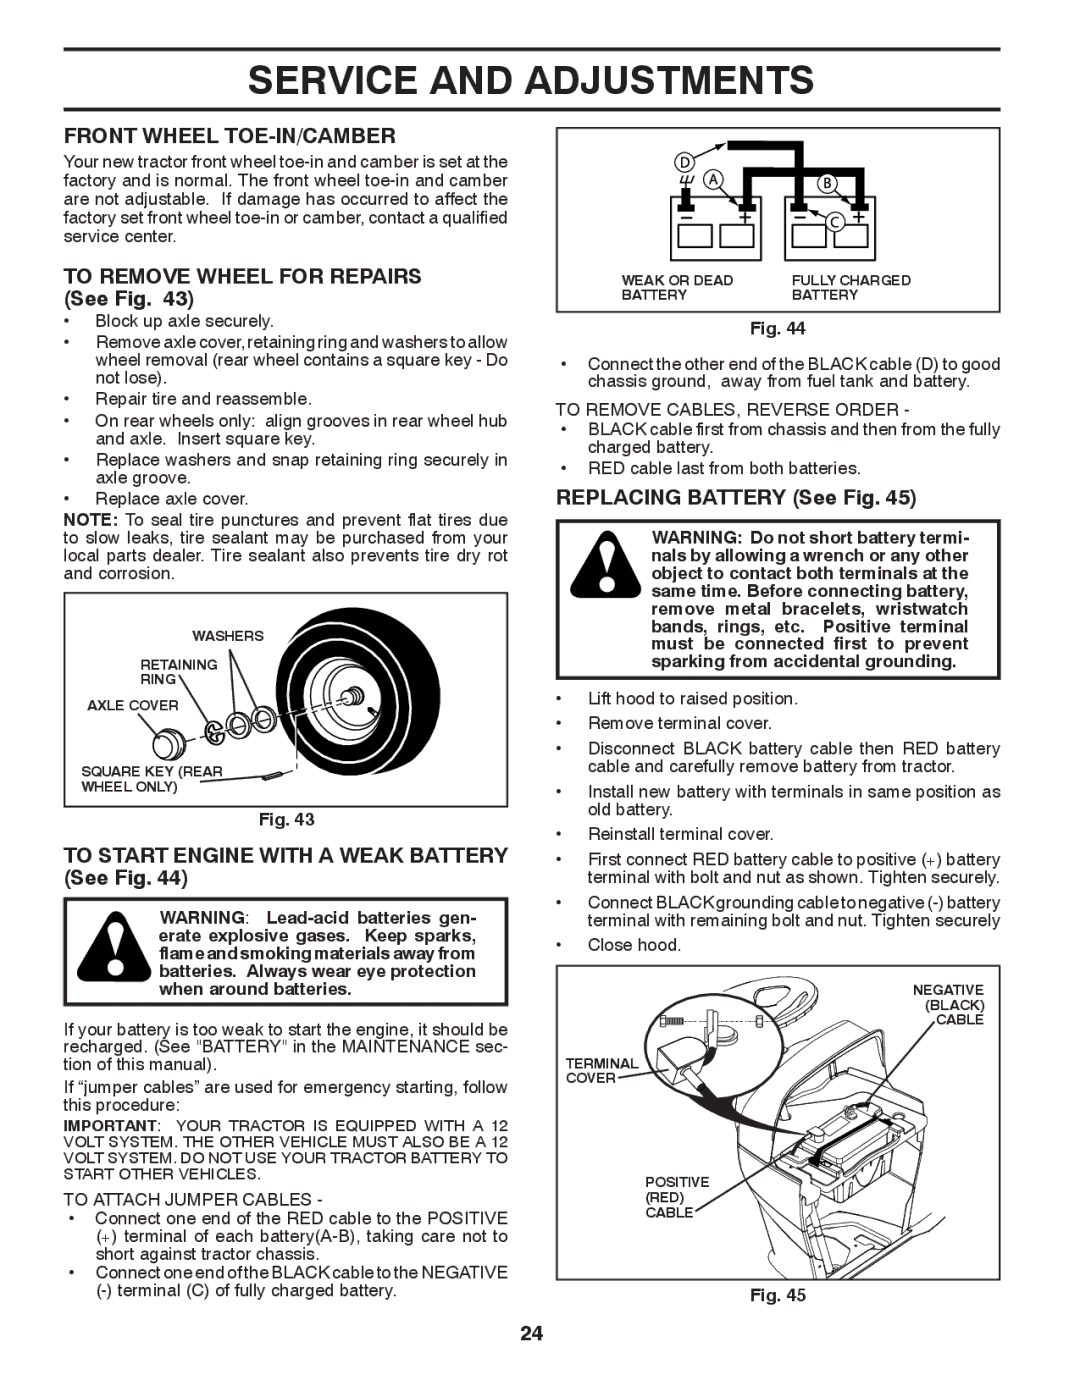 Husqvarna LGTH2454 owner manual Front Wheel TOE-IN/CAMBER, To Remove Wheel for Repairs See Fig, Replacing Battery See Fig 